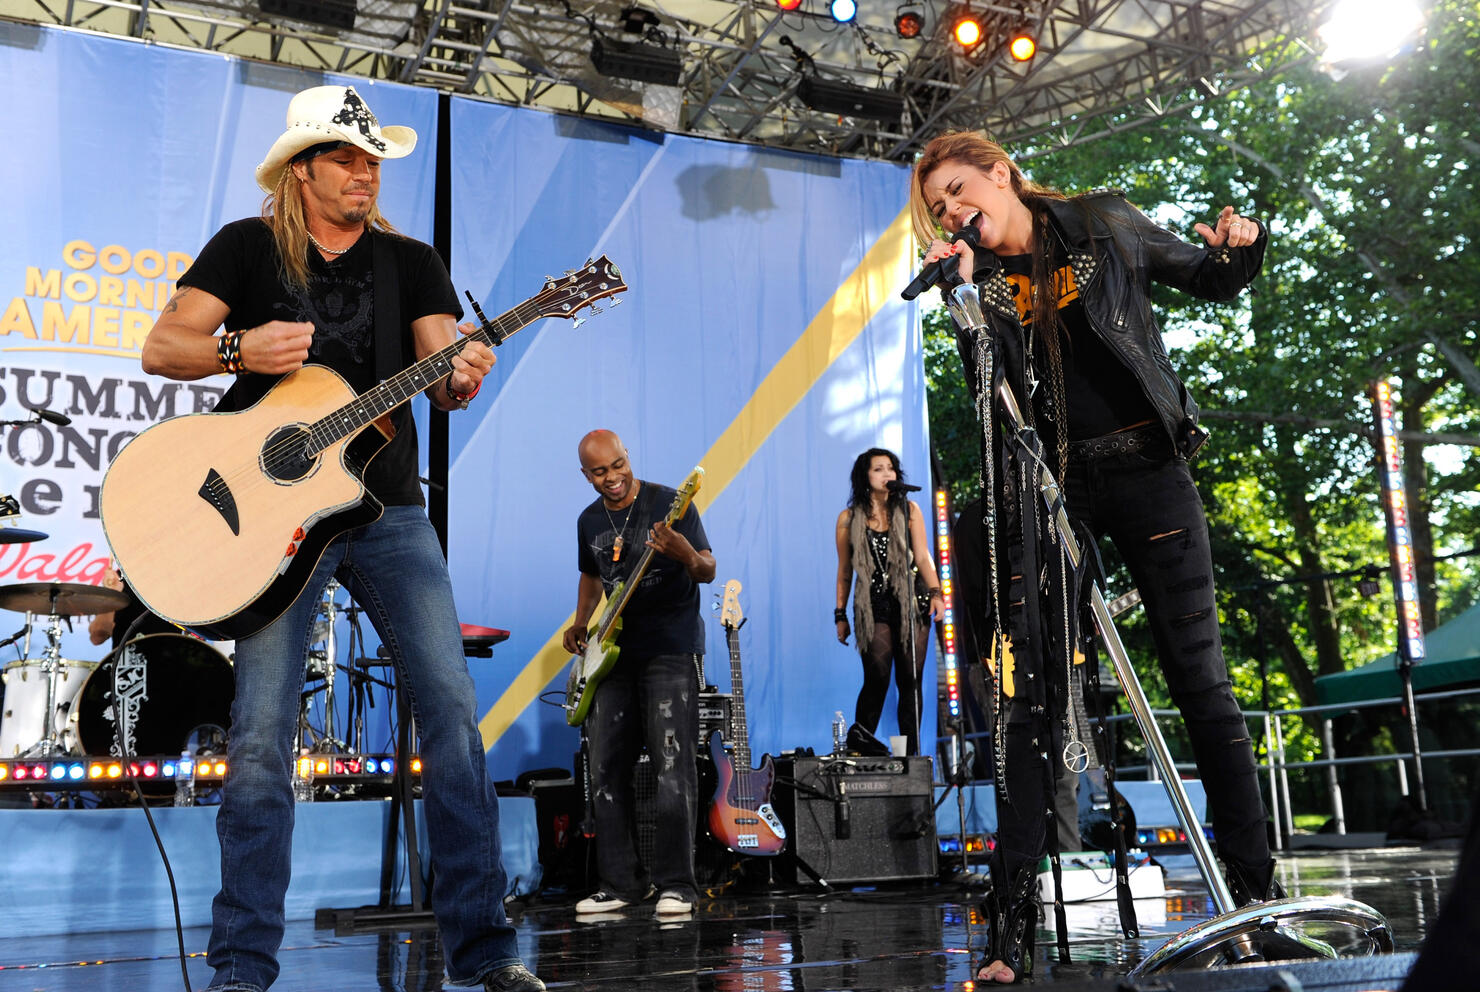 Miley Cyrus Performs On ABC's "Good Morning America" - June 18, 2010 - Show